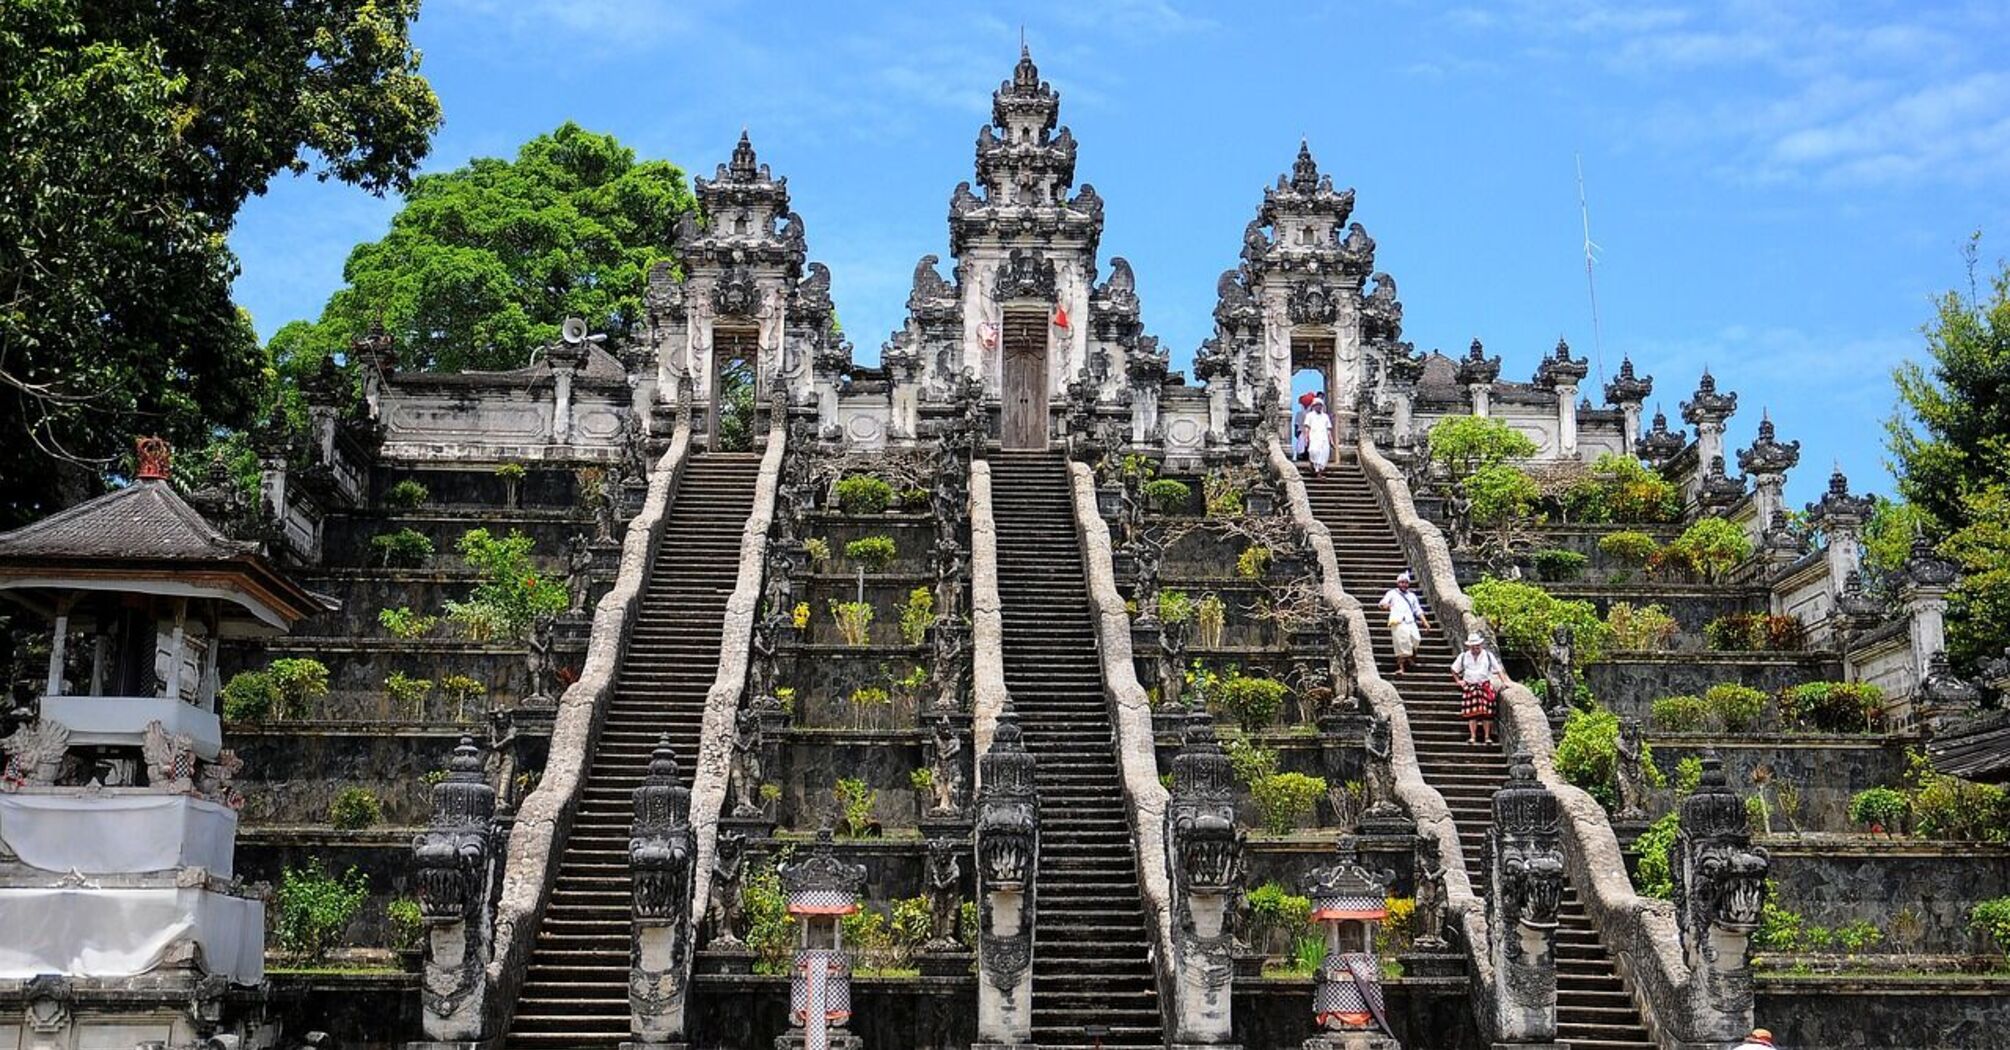 The cost of traveling to Bali is rising: the impact of the tourist tax and higher prices for entertainment